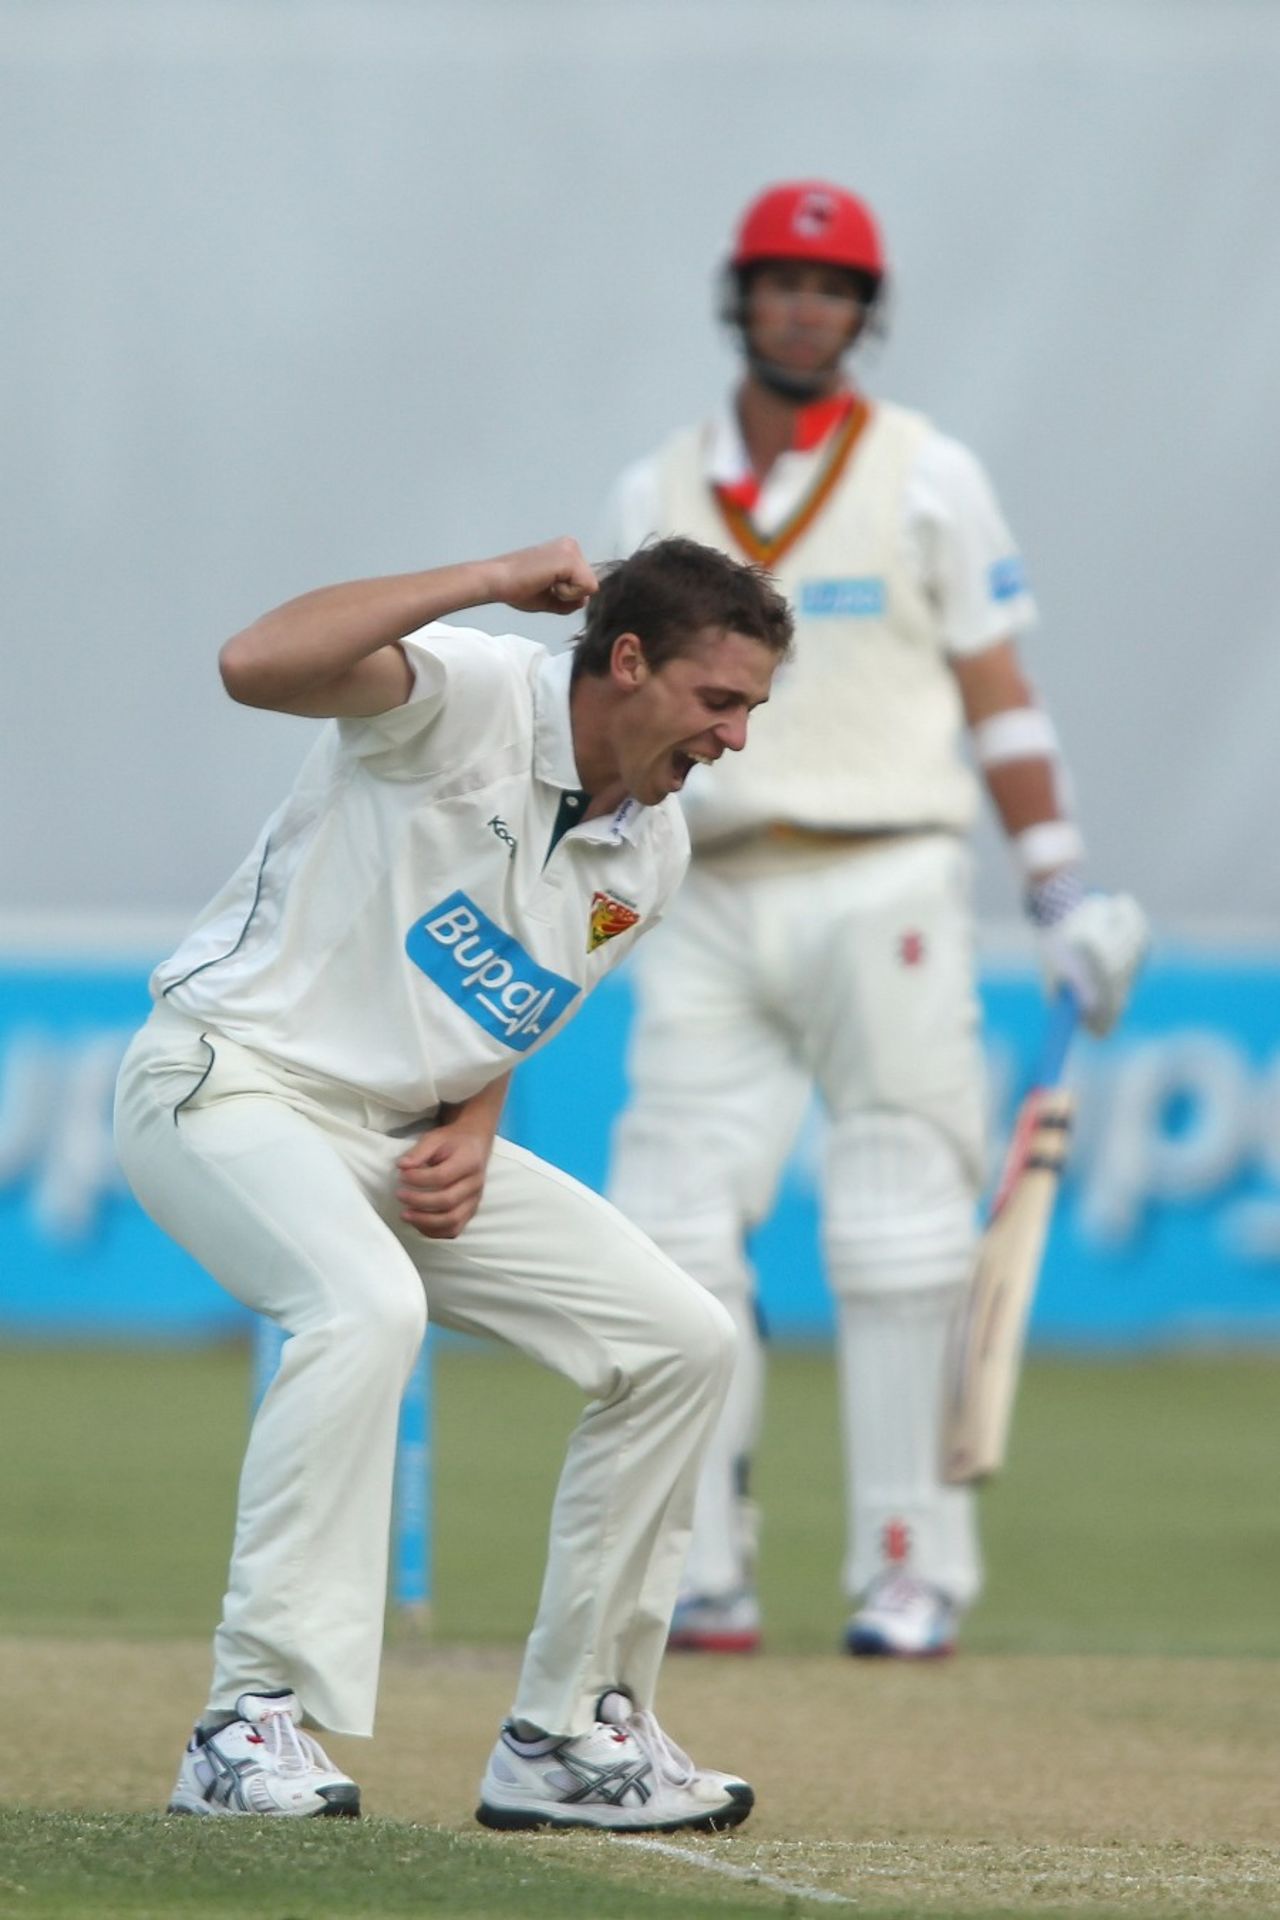 Luke Butterworth celebrates one of his five wickets, South Australia v Tasmania, Sheffield Shield, Adelaide, 2nd day, October 10, 2012